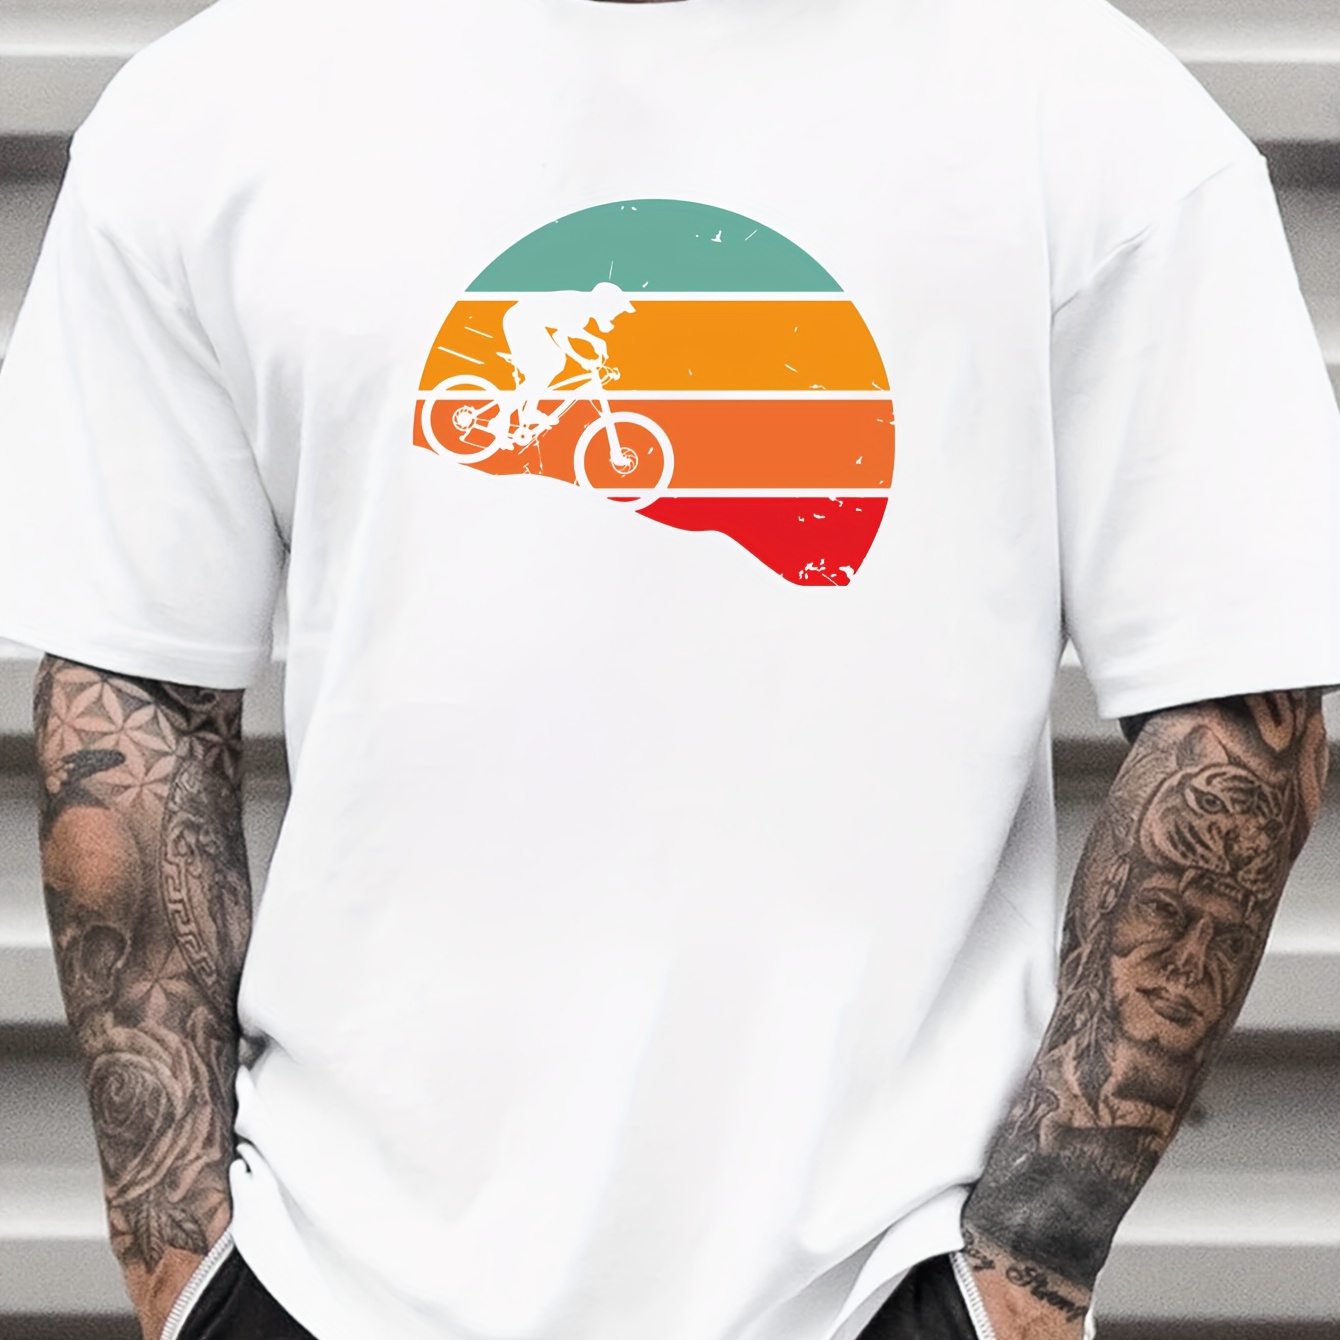 

Bike Creative Print Summer Casual Cotton T-shirt Short Sleeve For Men, Sporty Leisure Style, Fashion Crew Neck Top For Daily Wear